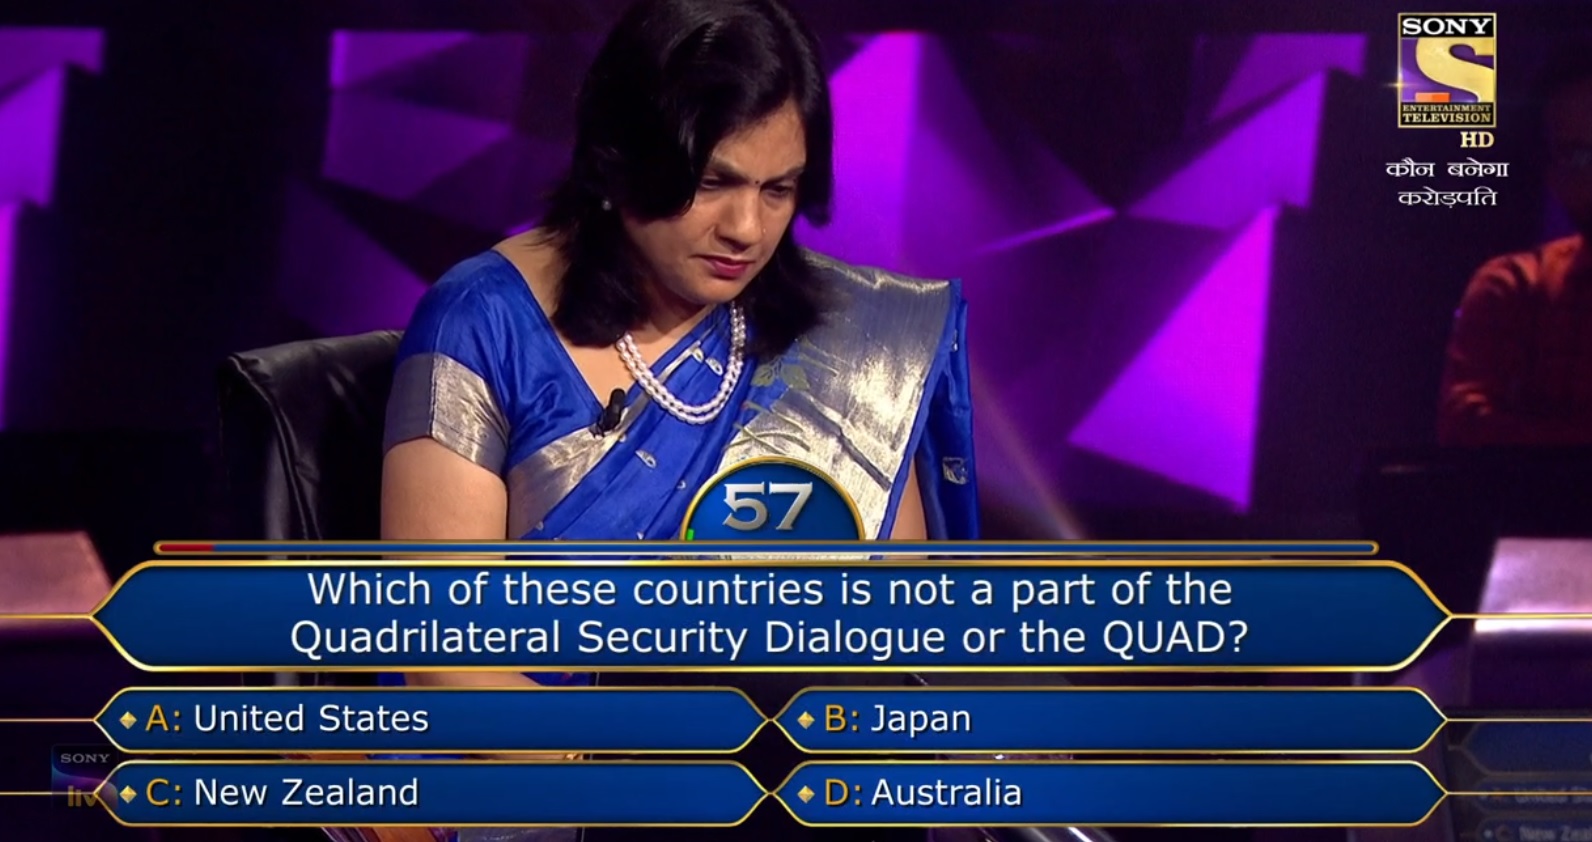 Ques : Which of these countries is not a part of the Quadrilateral Security Dialogue or the QUAD?